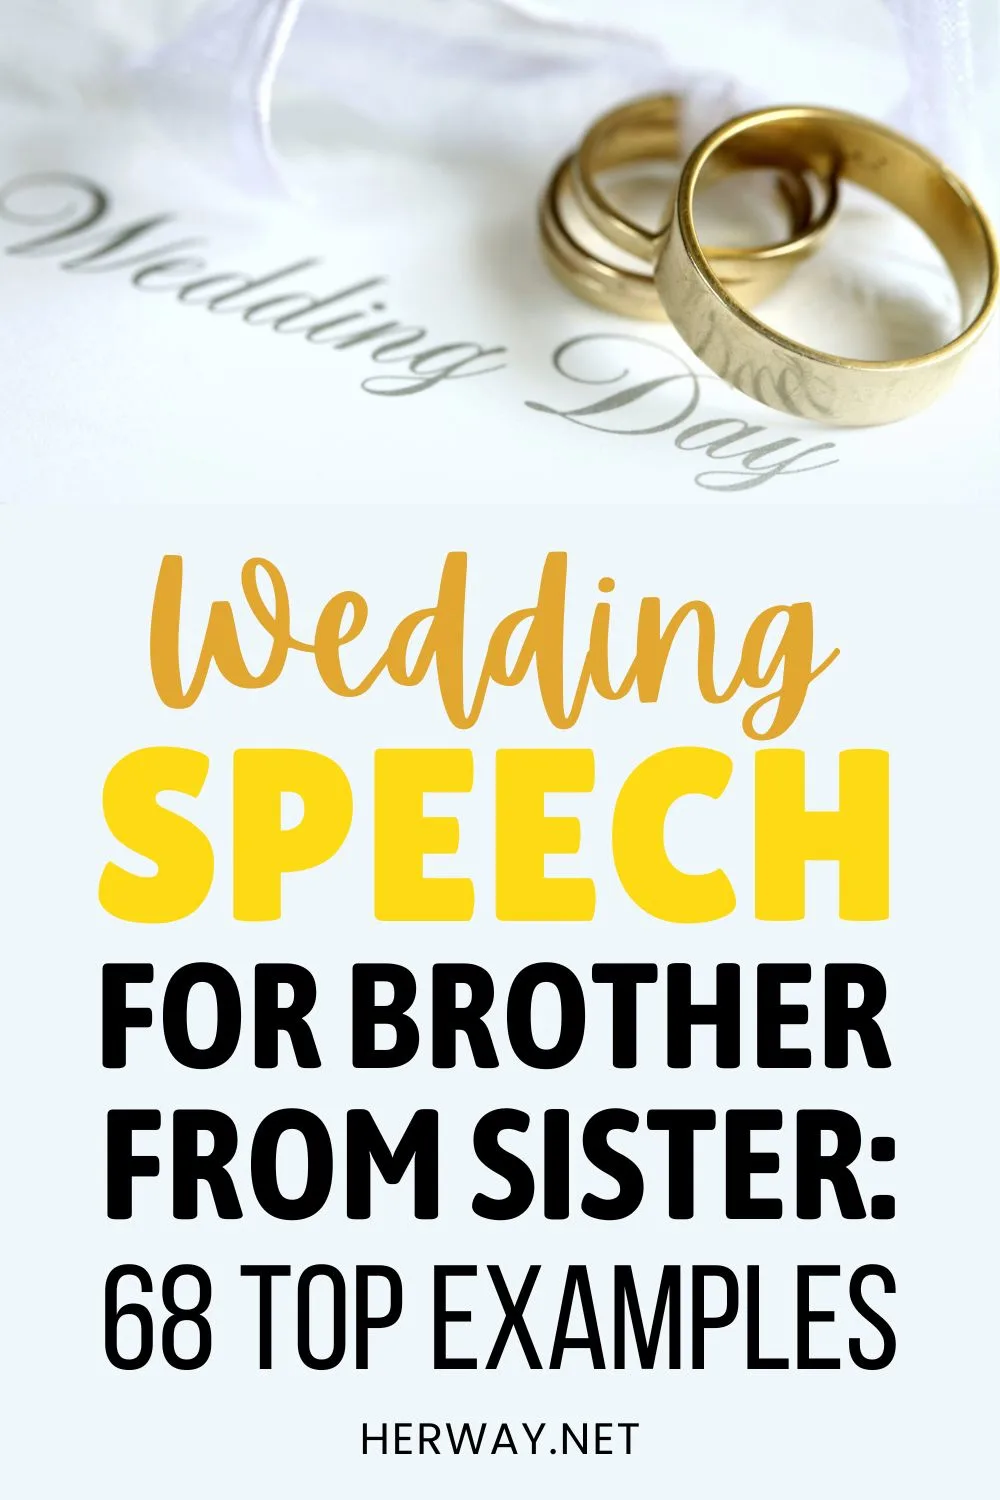 Wedding Speech For Brother From Sister 68 Top Examples Pinterest